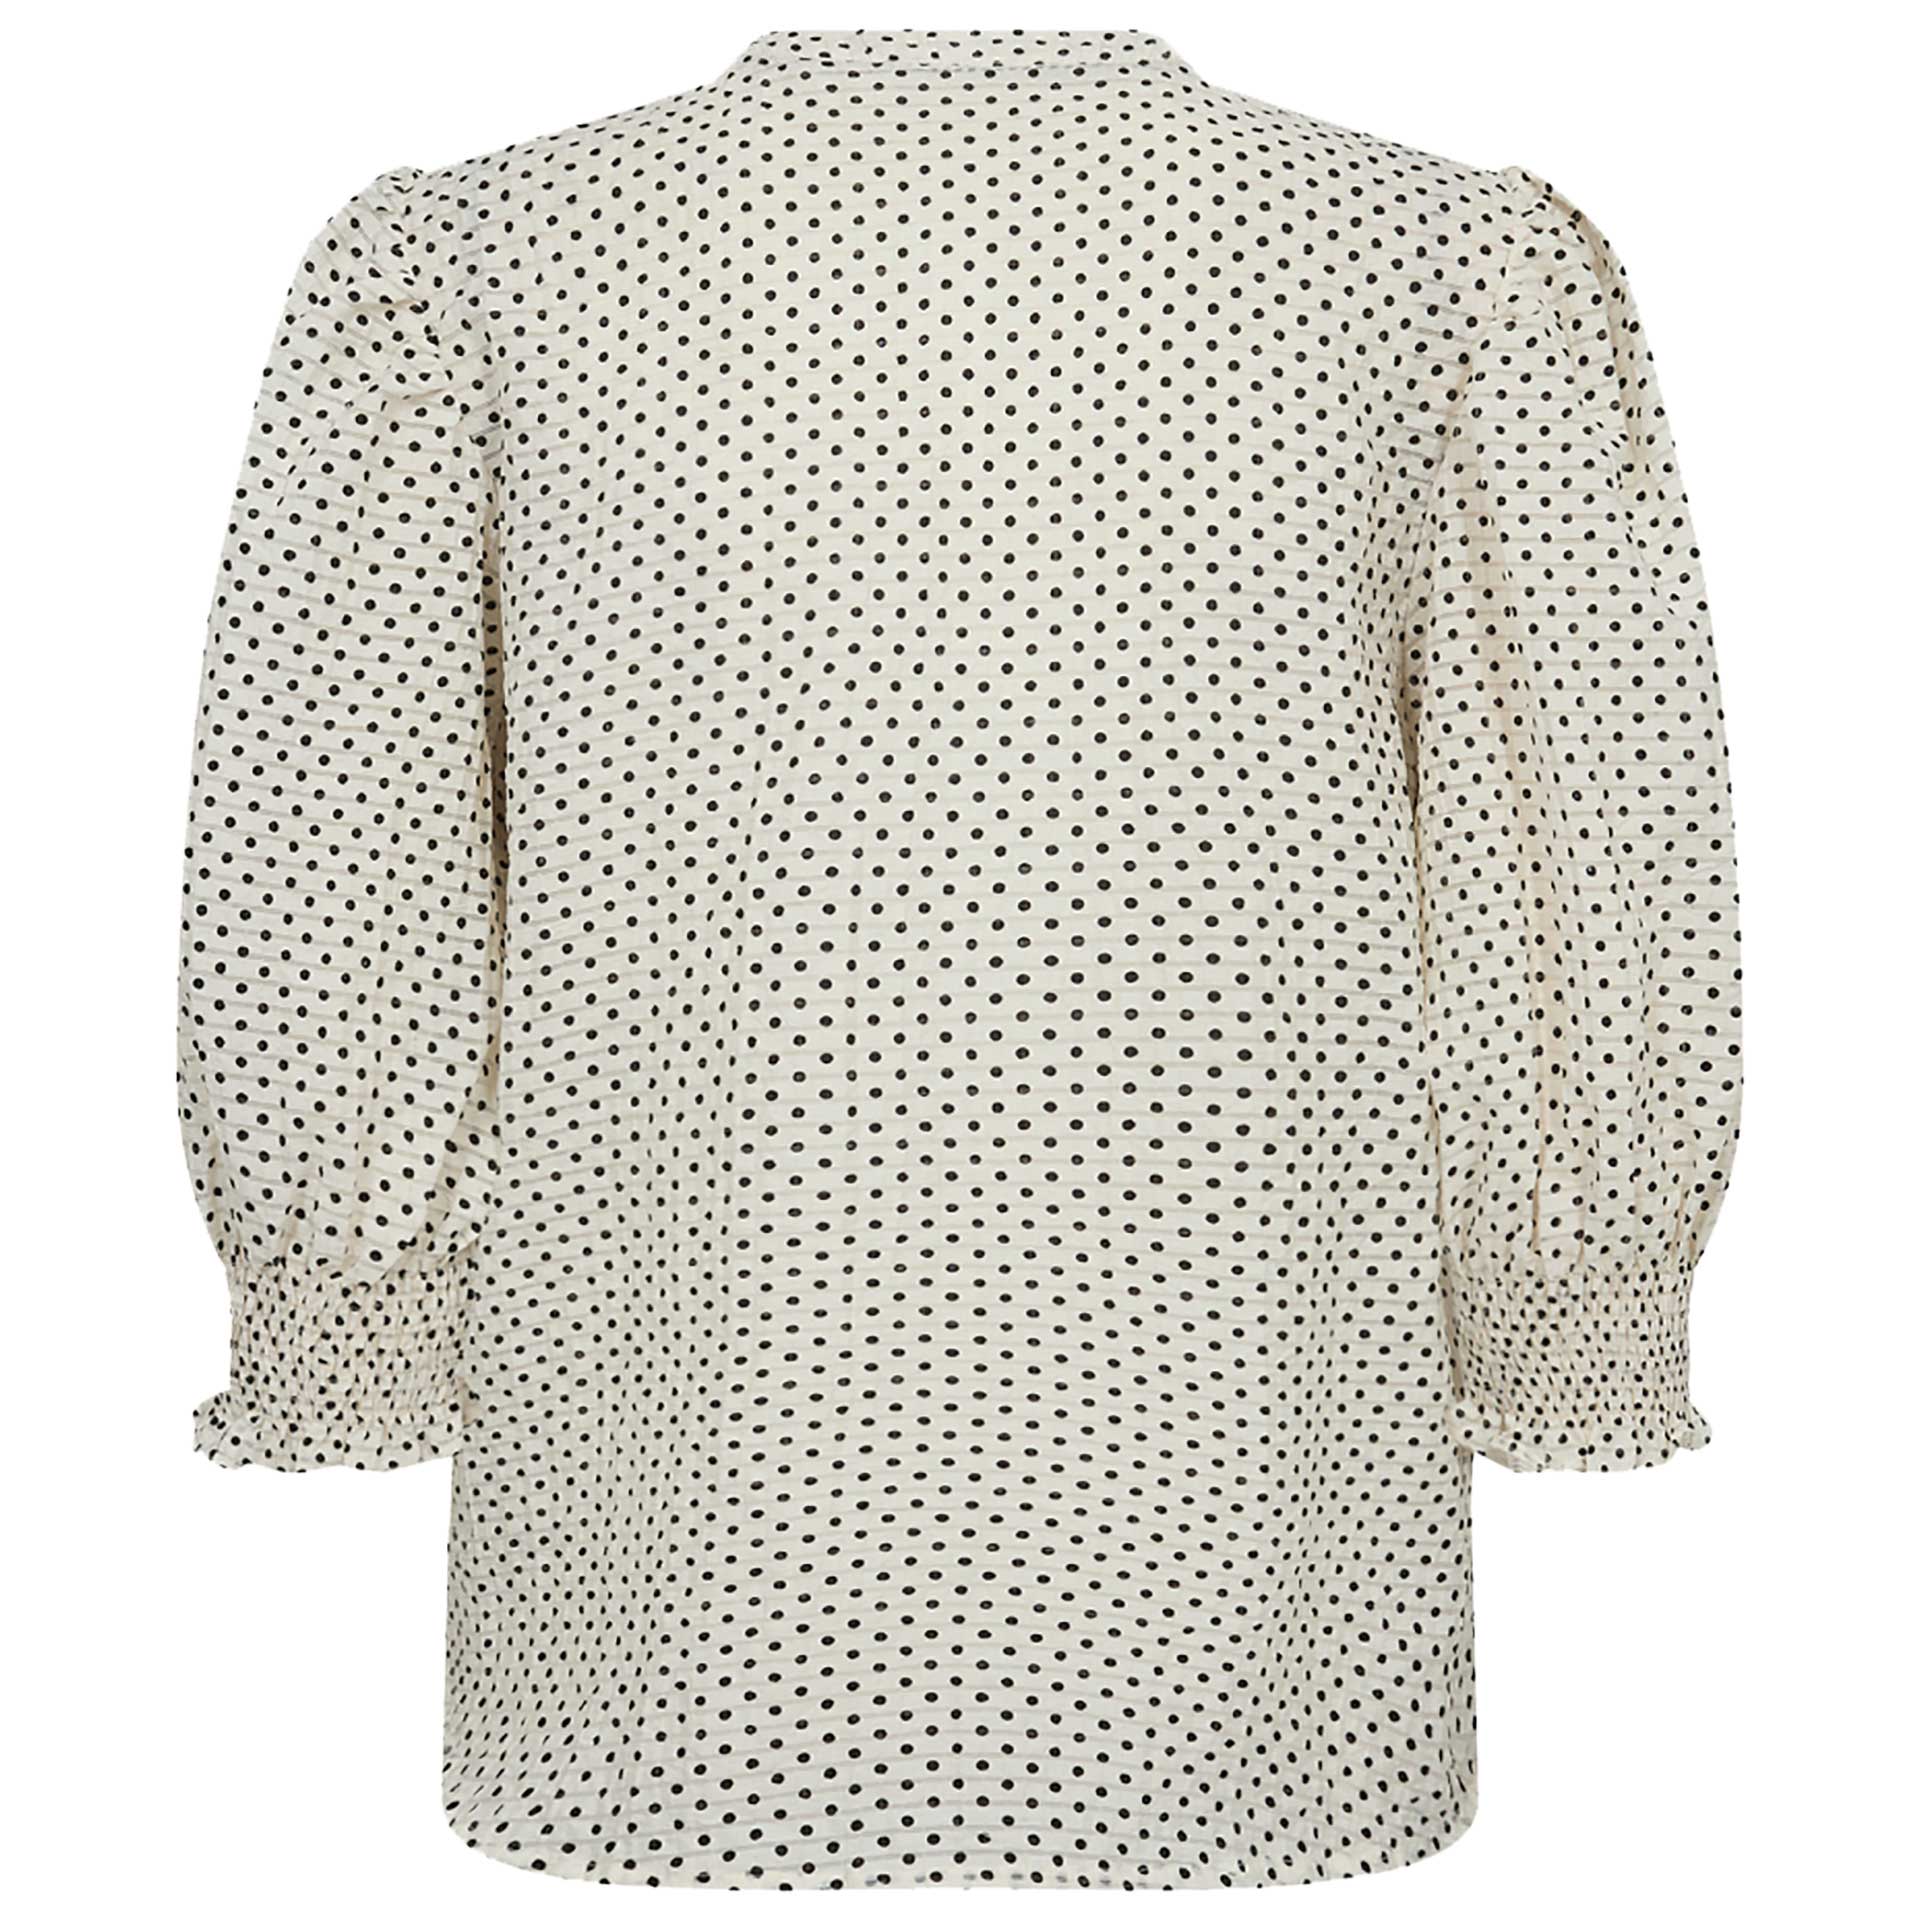 Co'couture Blouse top Chess dot 2